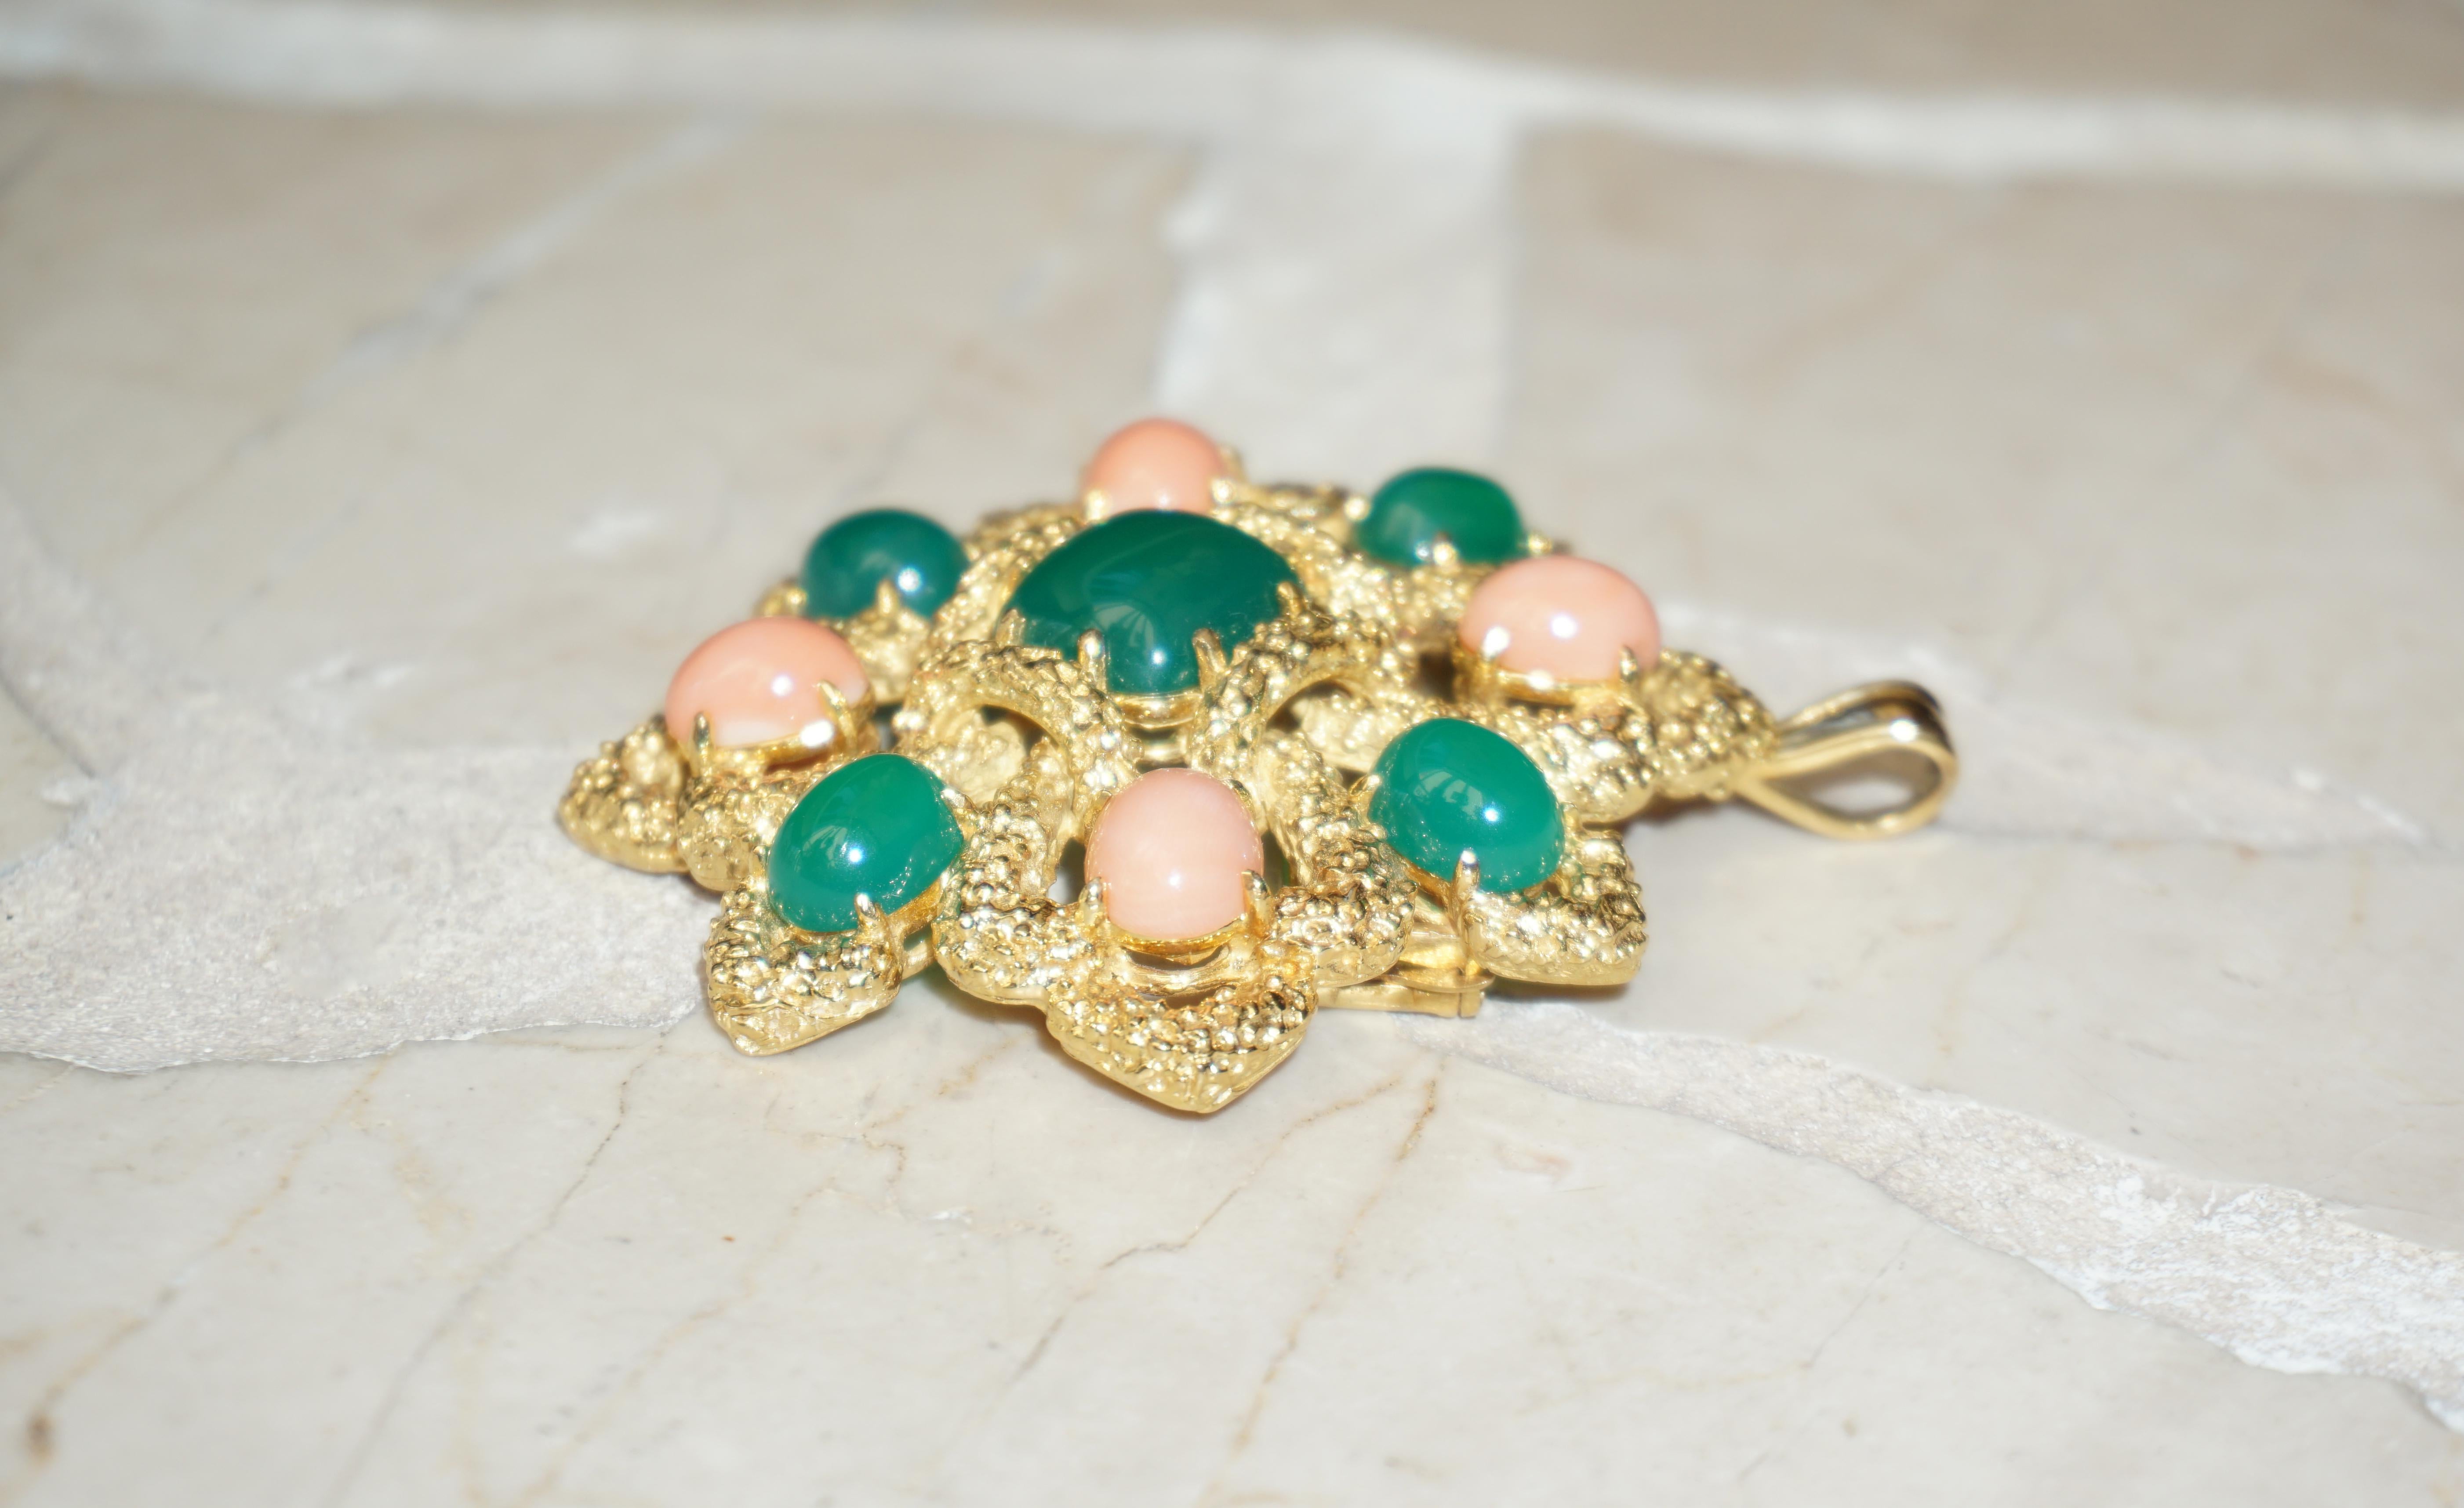 Van Cleef & Arpels 18K Gold Chrysoprase and Coral Pendant Brooch For Sale 3